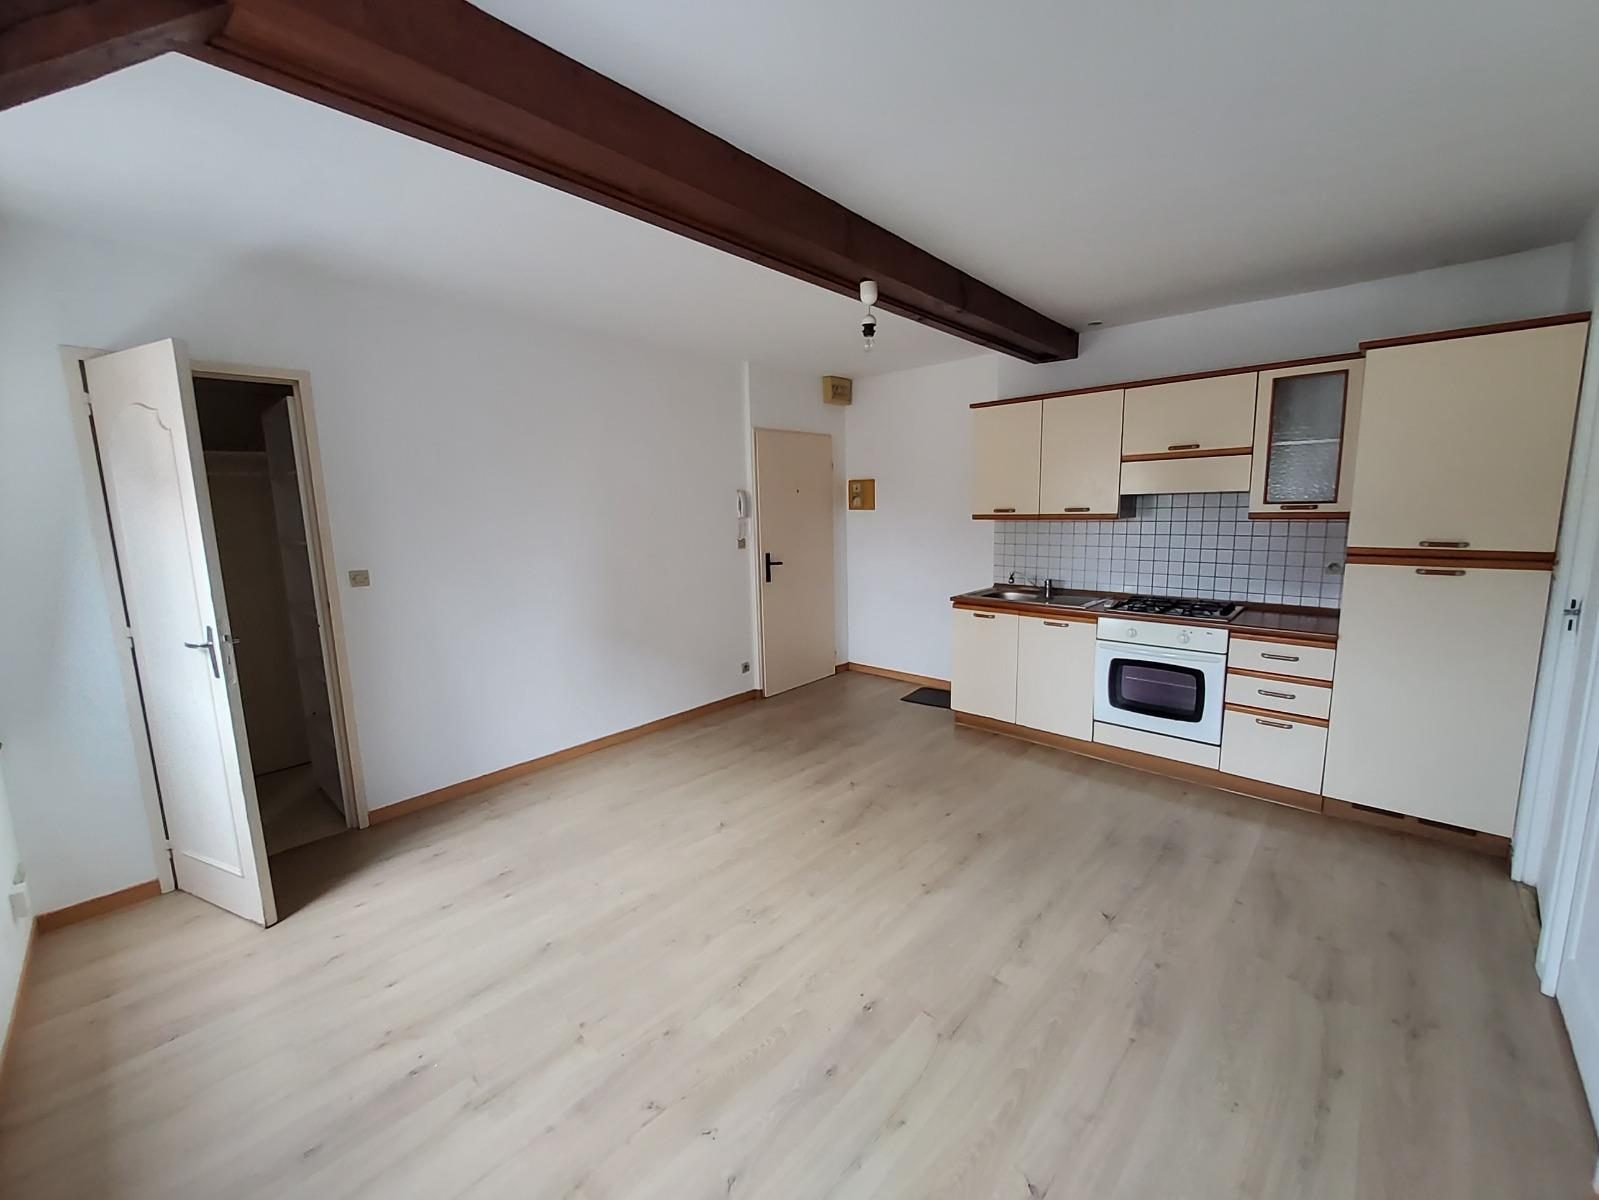 Immobilier vente à EPERNAY Appartement - Type 2